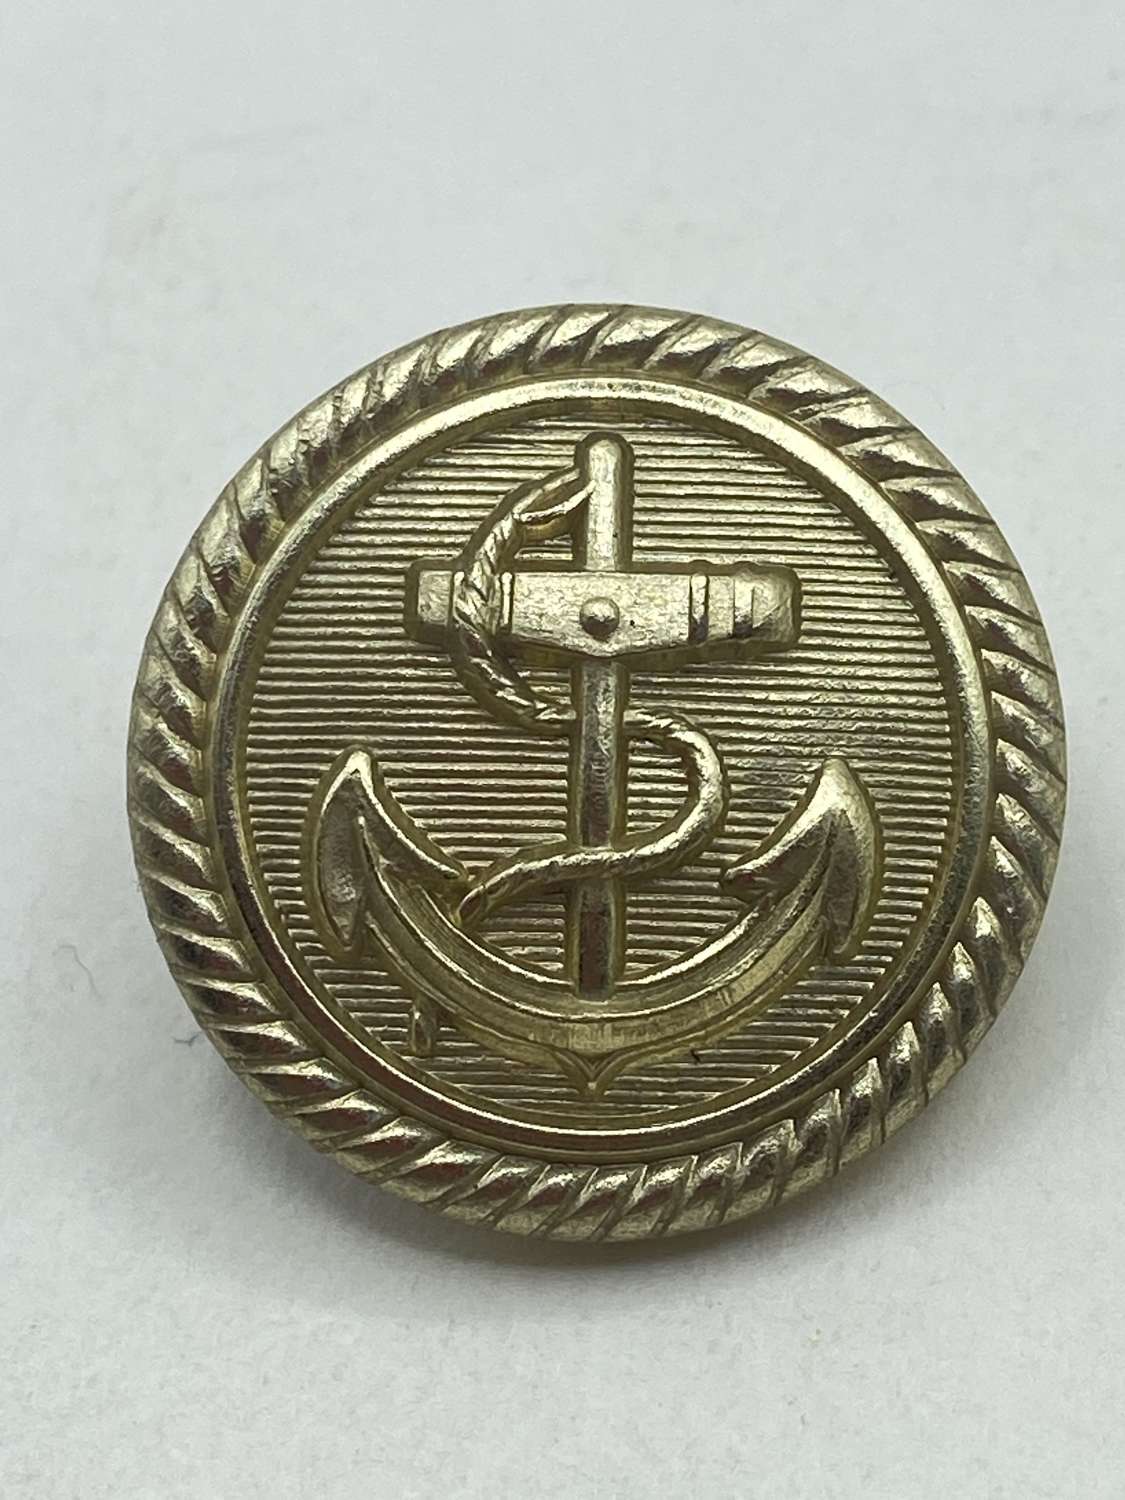 Post WW2 Royal Navy Large Tunic Button Marked J R GUANT London